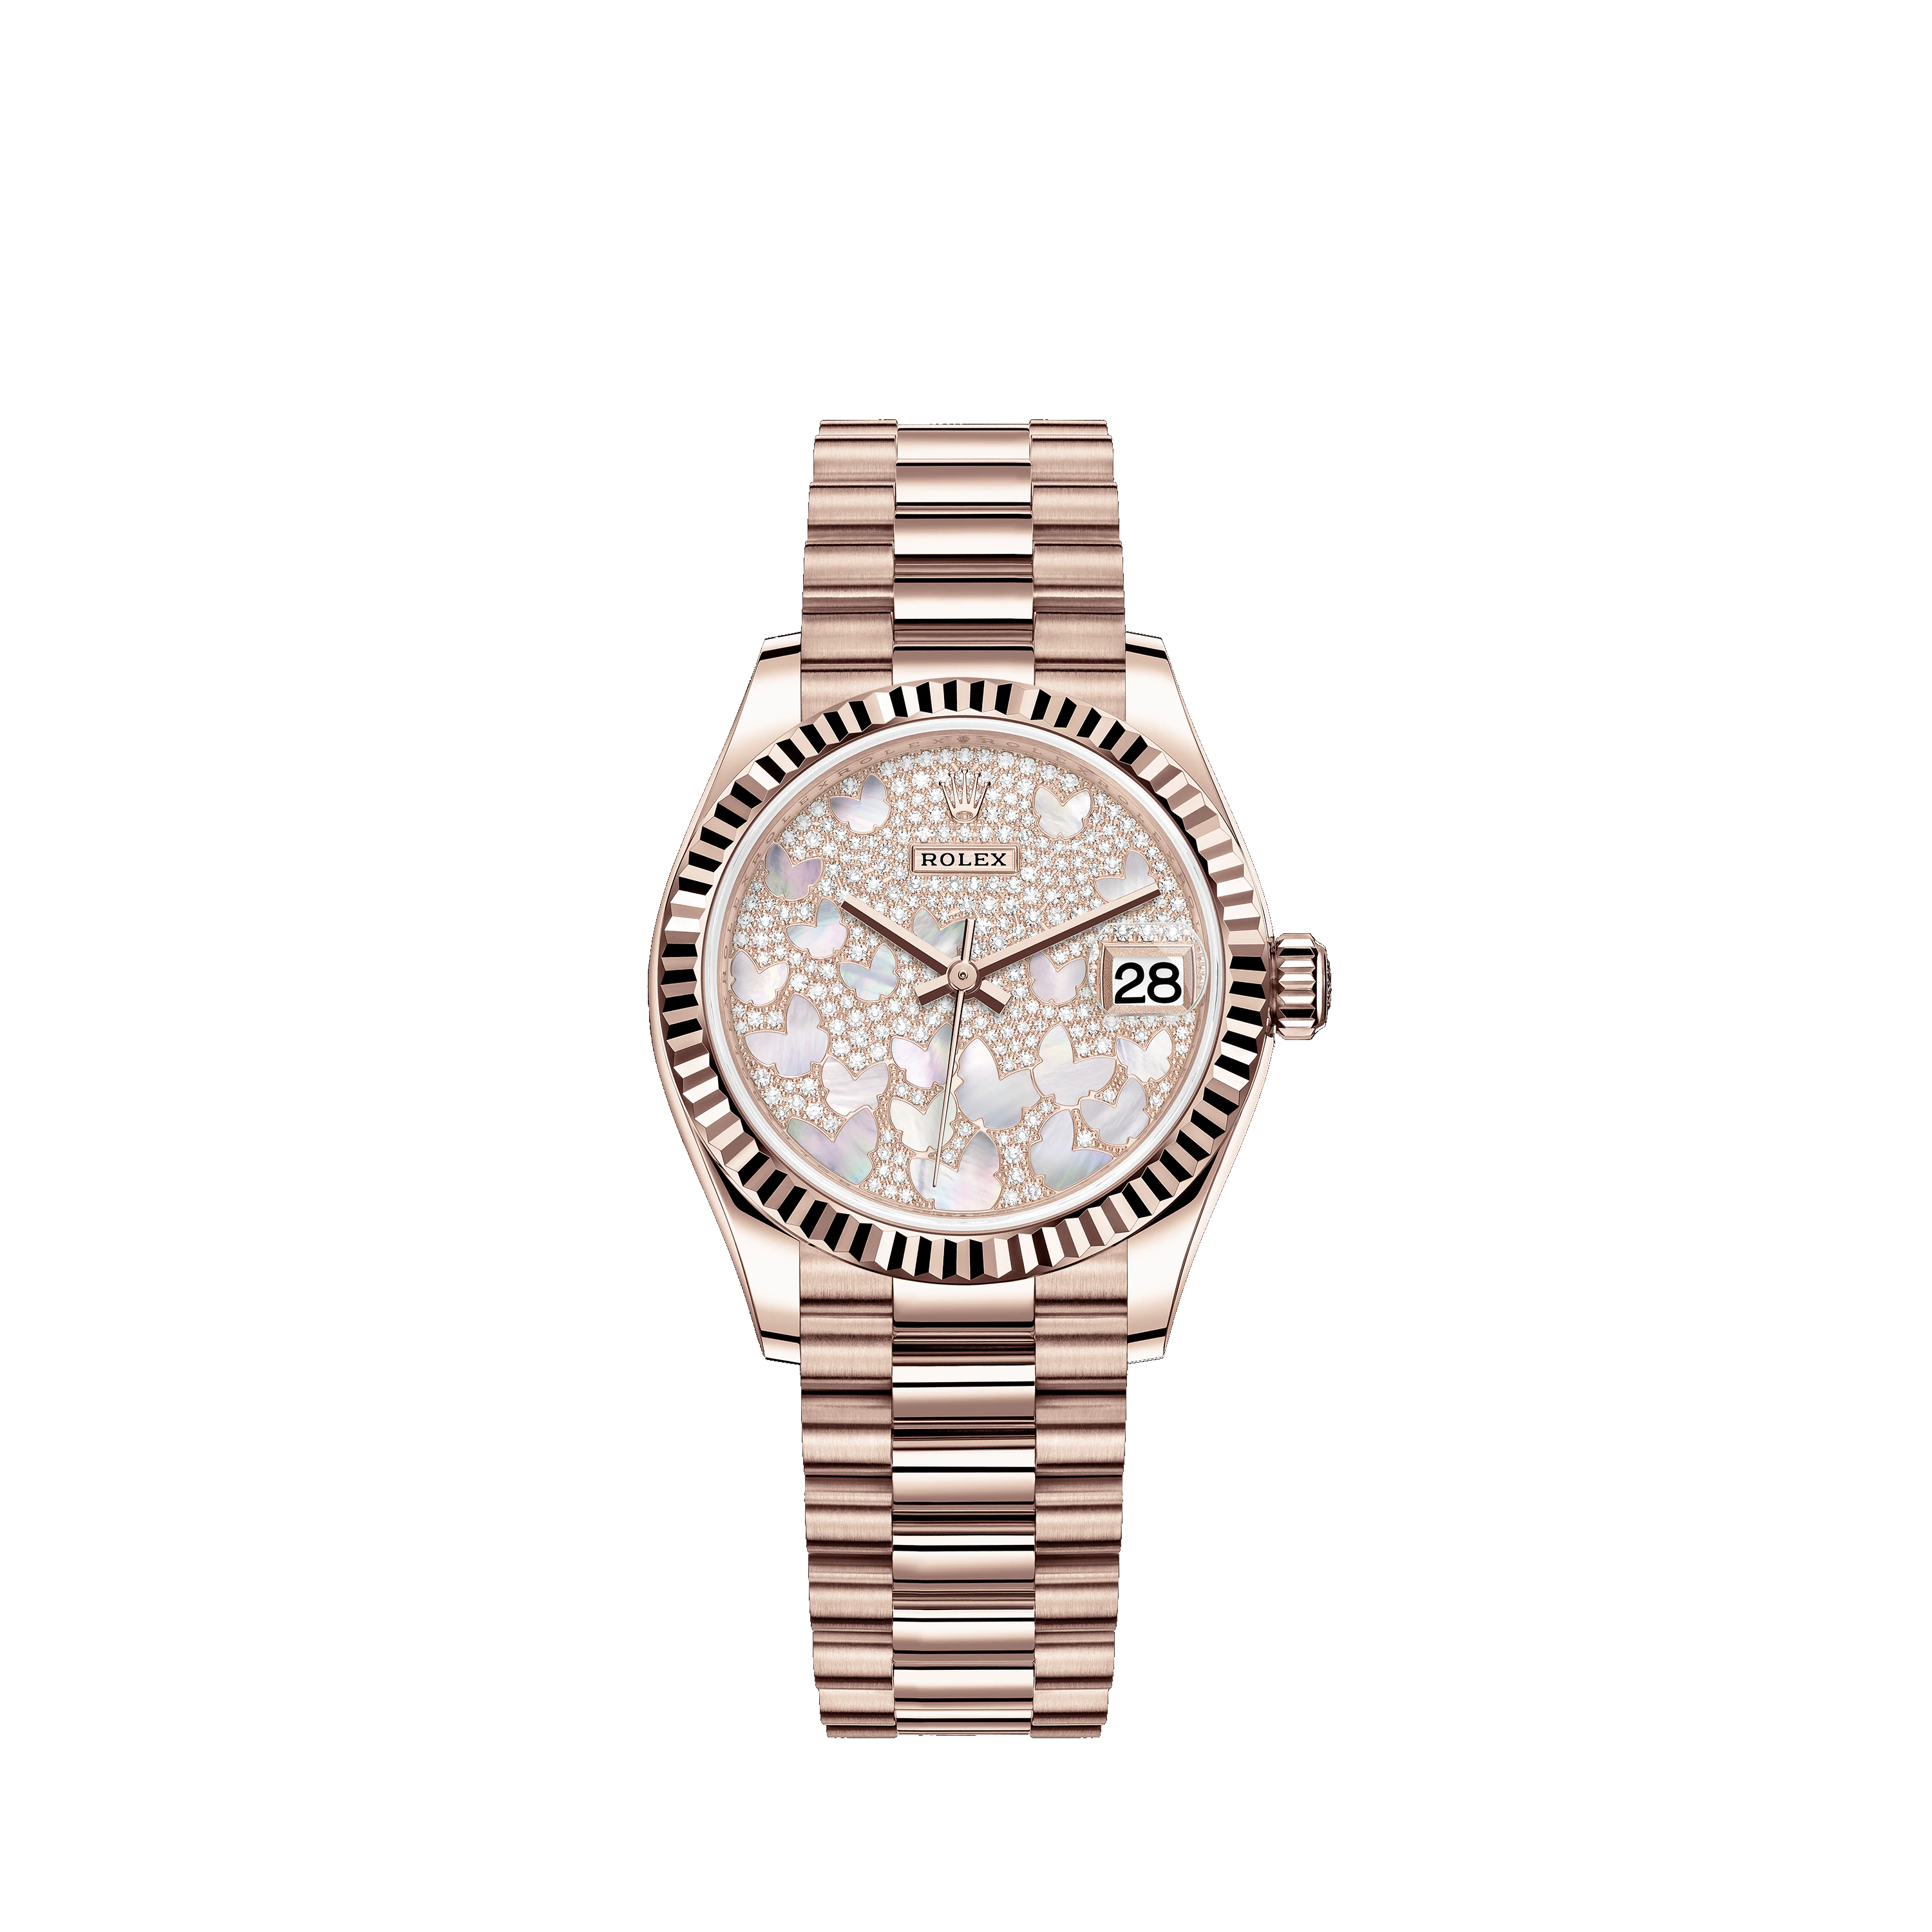 Datejust 31 278275 Rose Gold Watch (Paved, Mother-of-Pearl Butterfly)